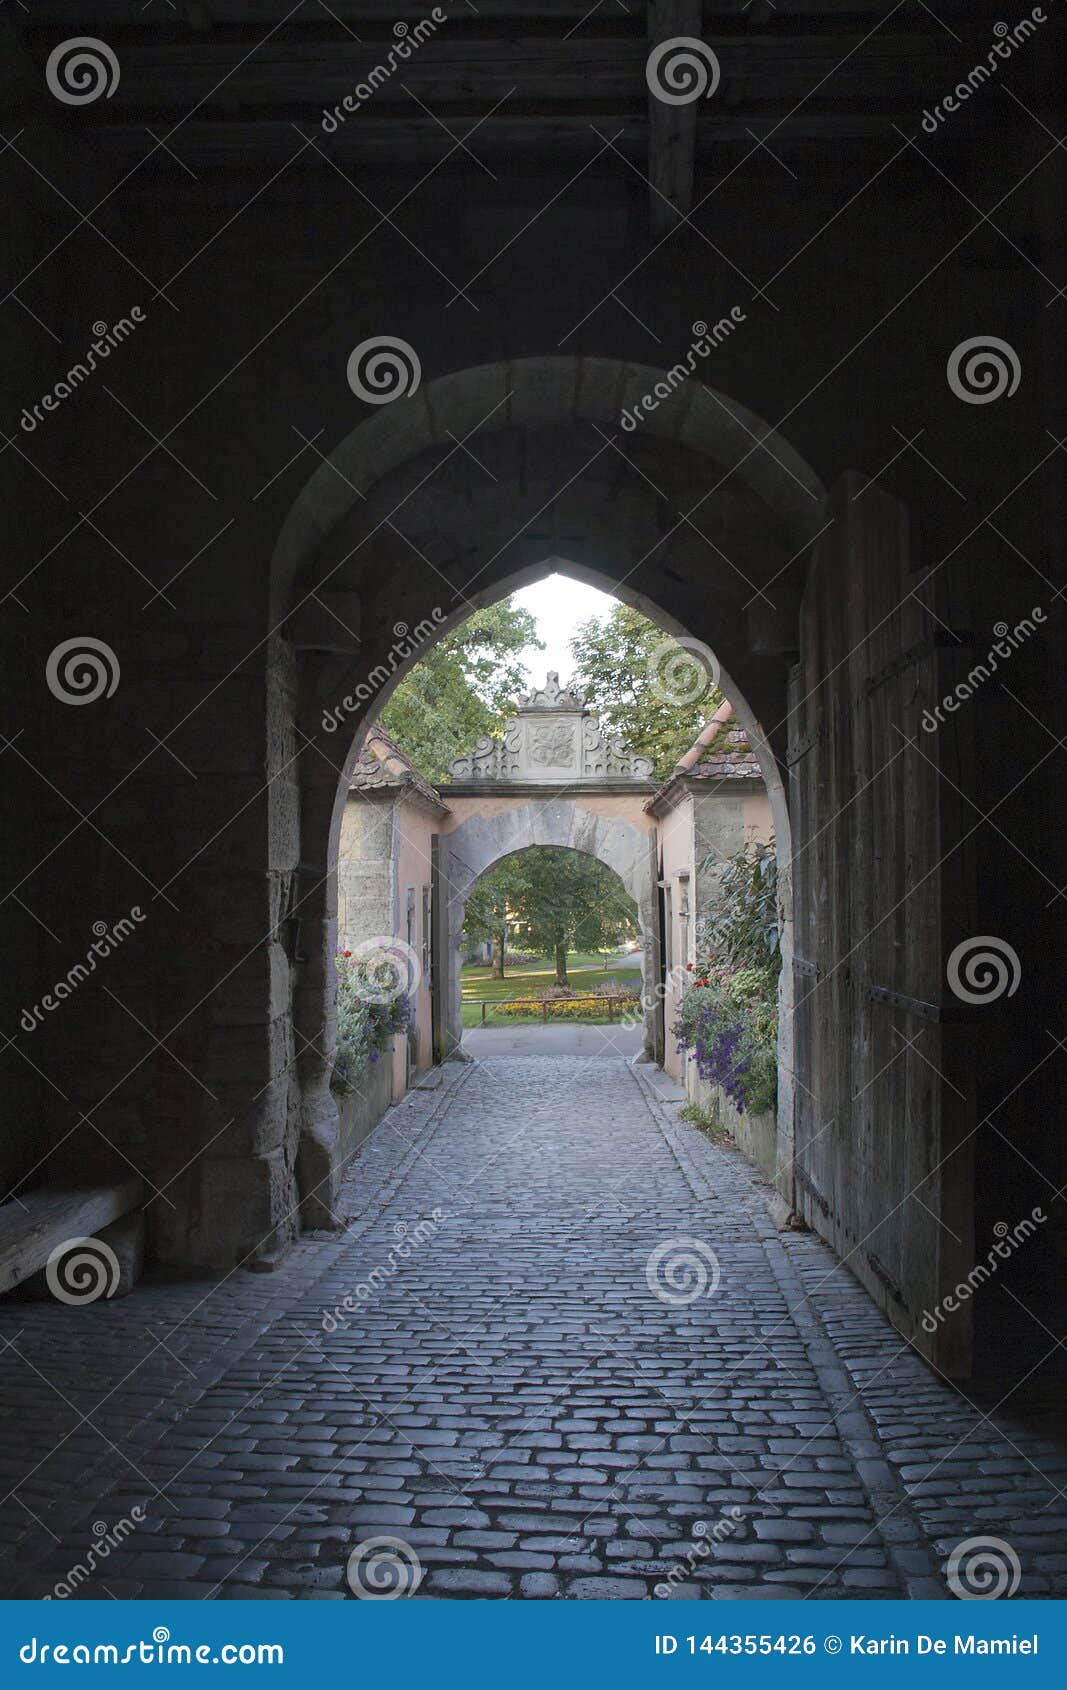 passage and gate to the castle garden